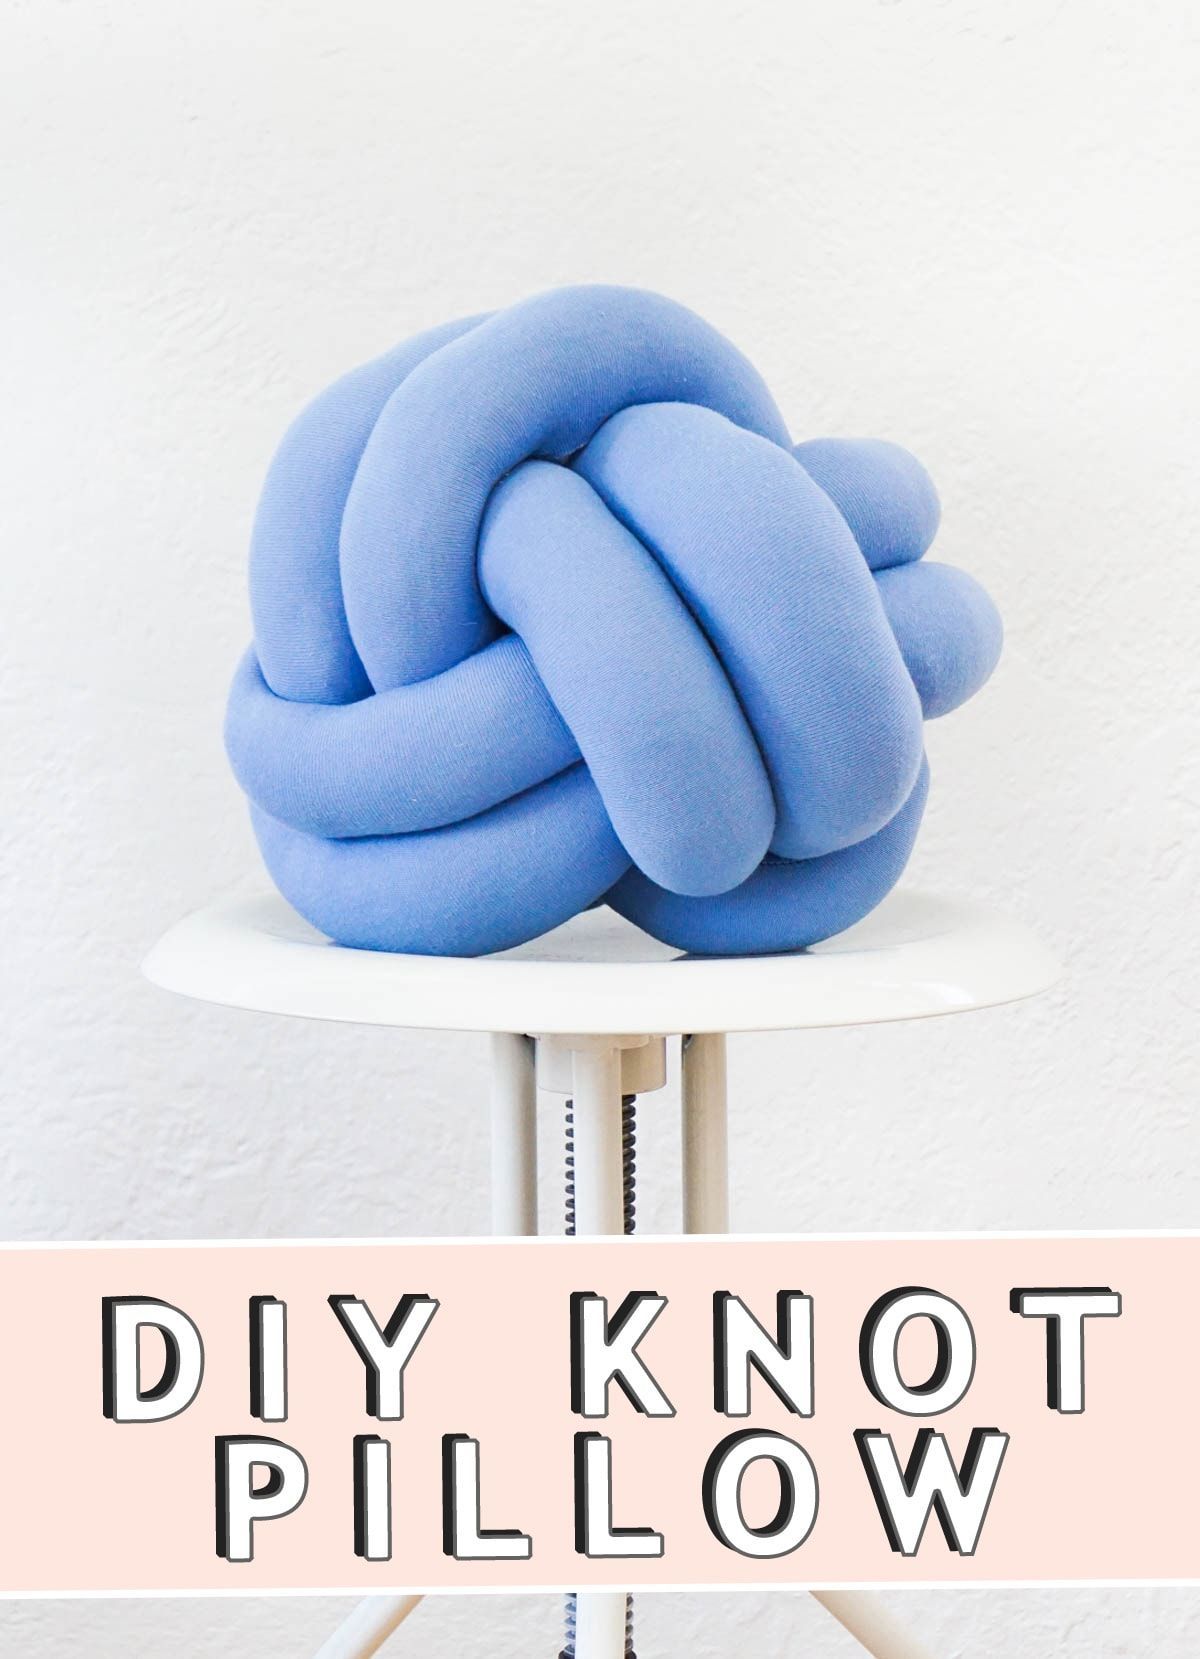 How to Make a DIY Knot Pillow Instructions | Sugar & Cloth - How to Make a DIY Knot Pillow Instructions | Sugar & Cloth -   17 diy Pillows designs ideas